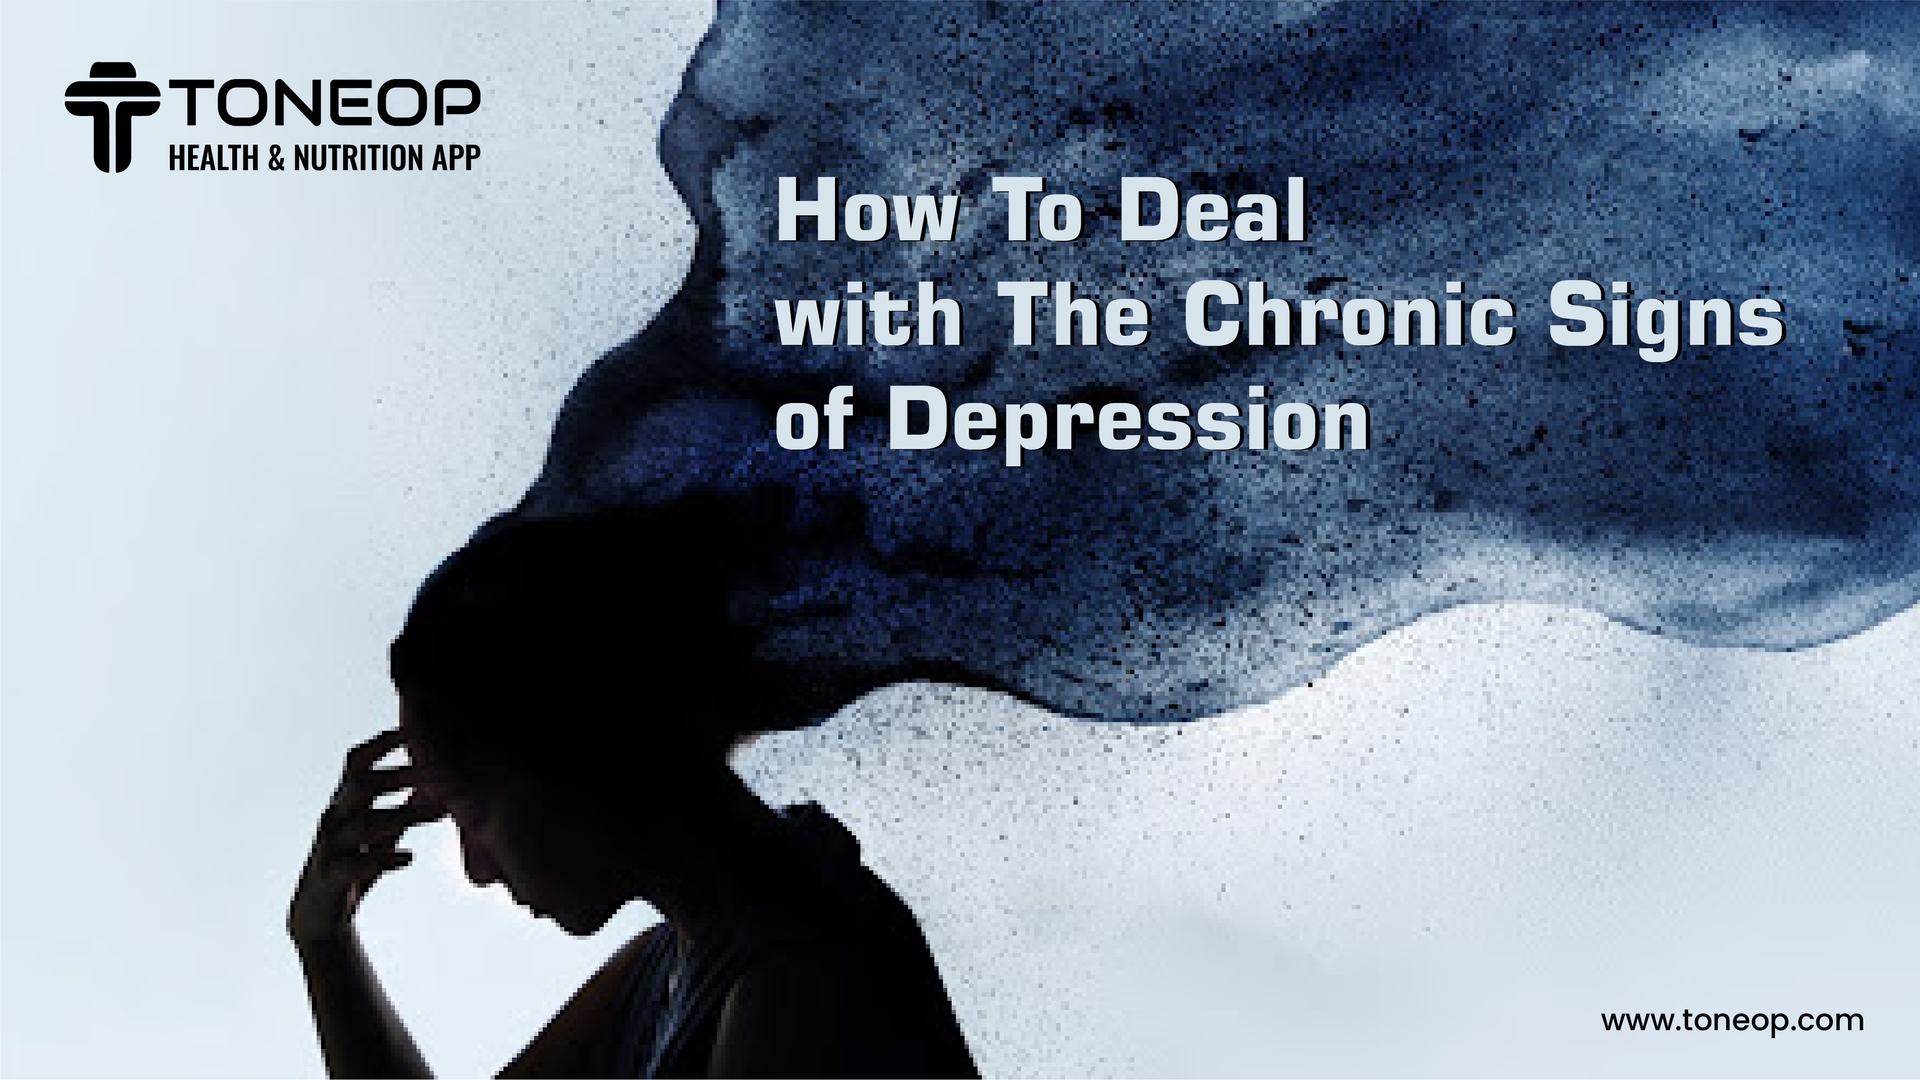 How To Deal With The Chronic Signs Of Depression?